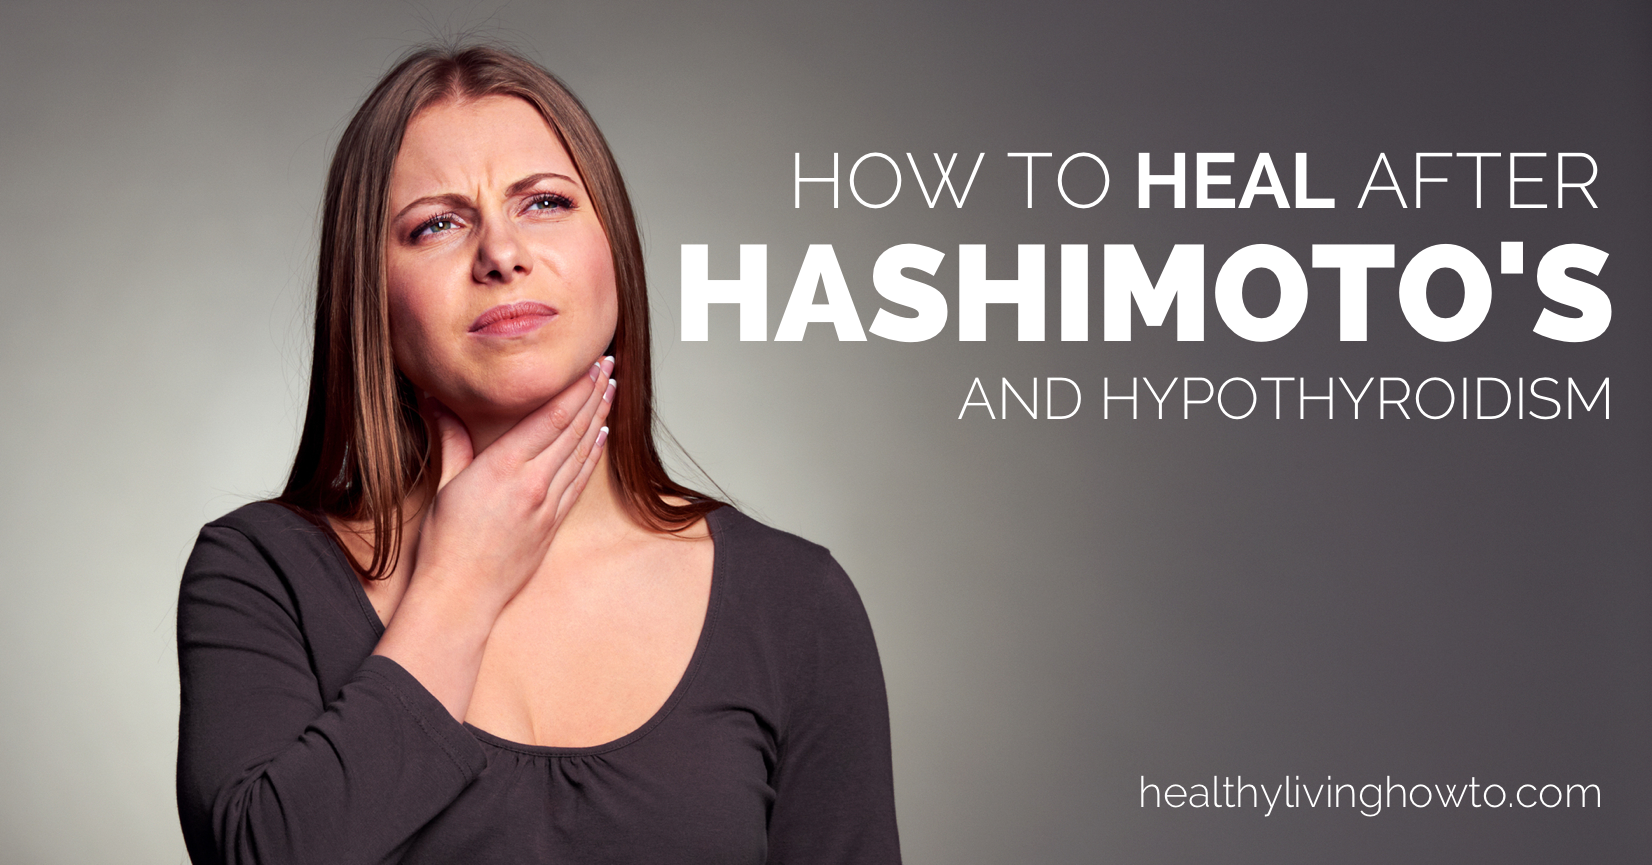 How Heal After Hashimoto's And Hypothyroidism | healthylivinghowto.com